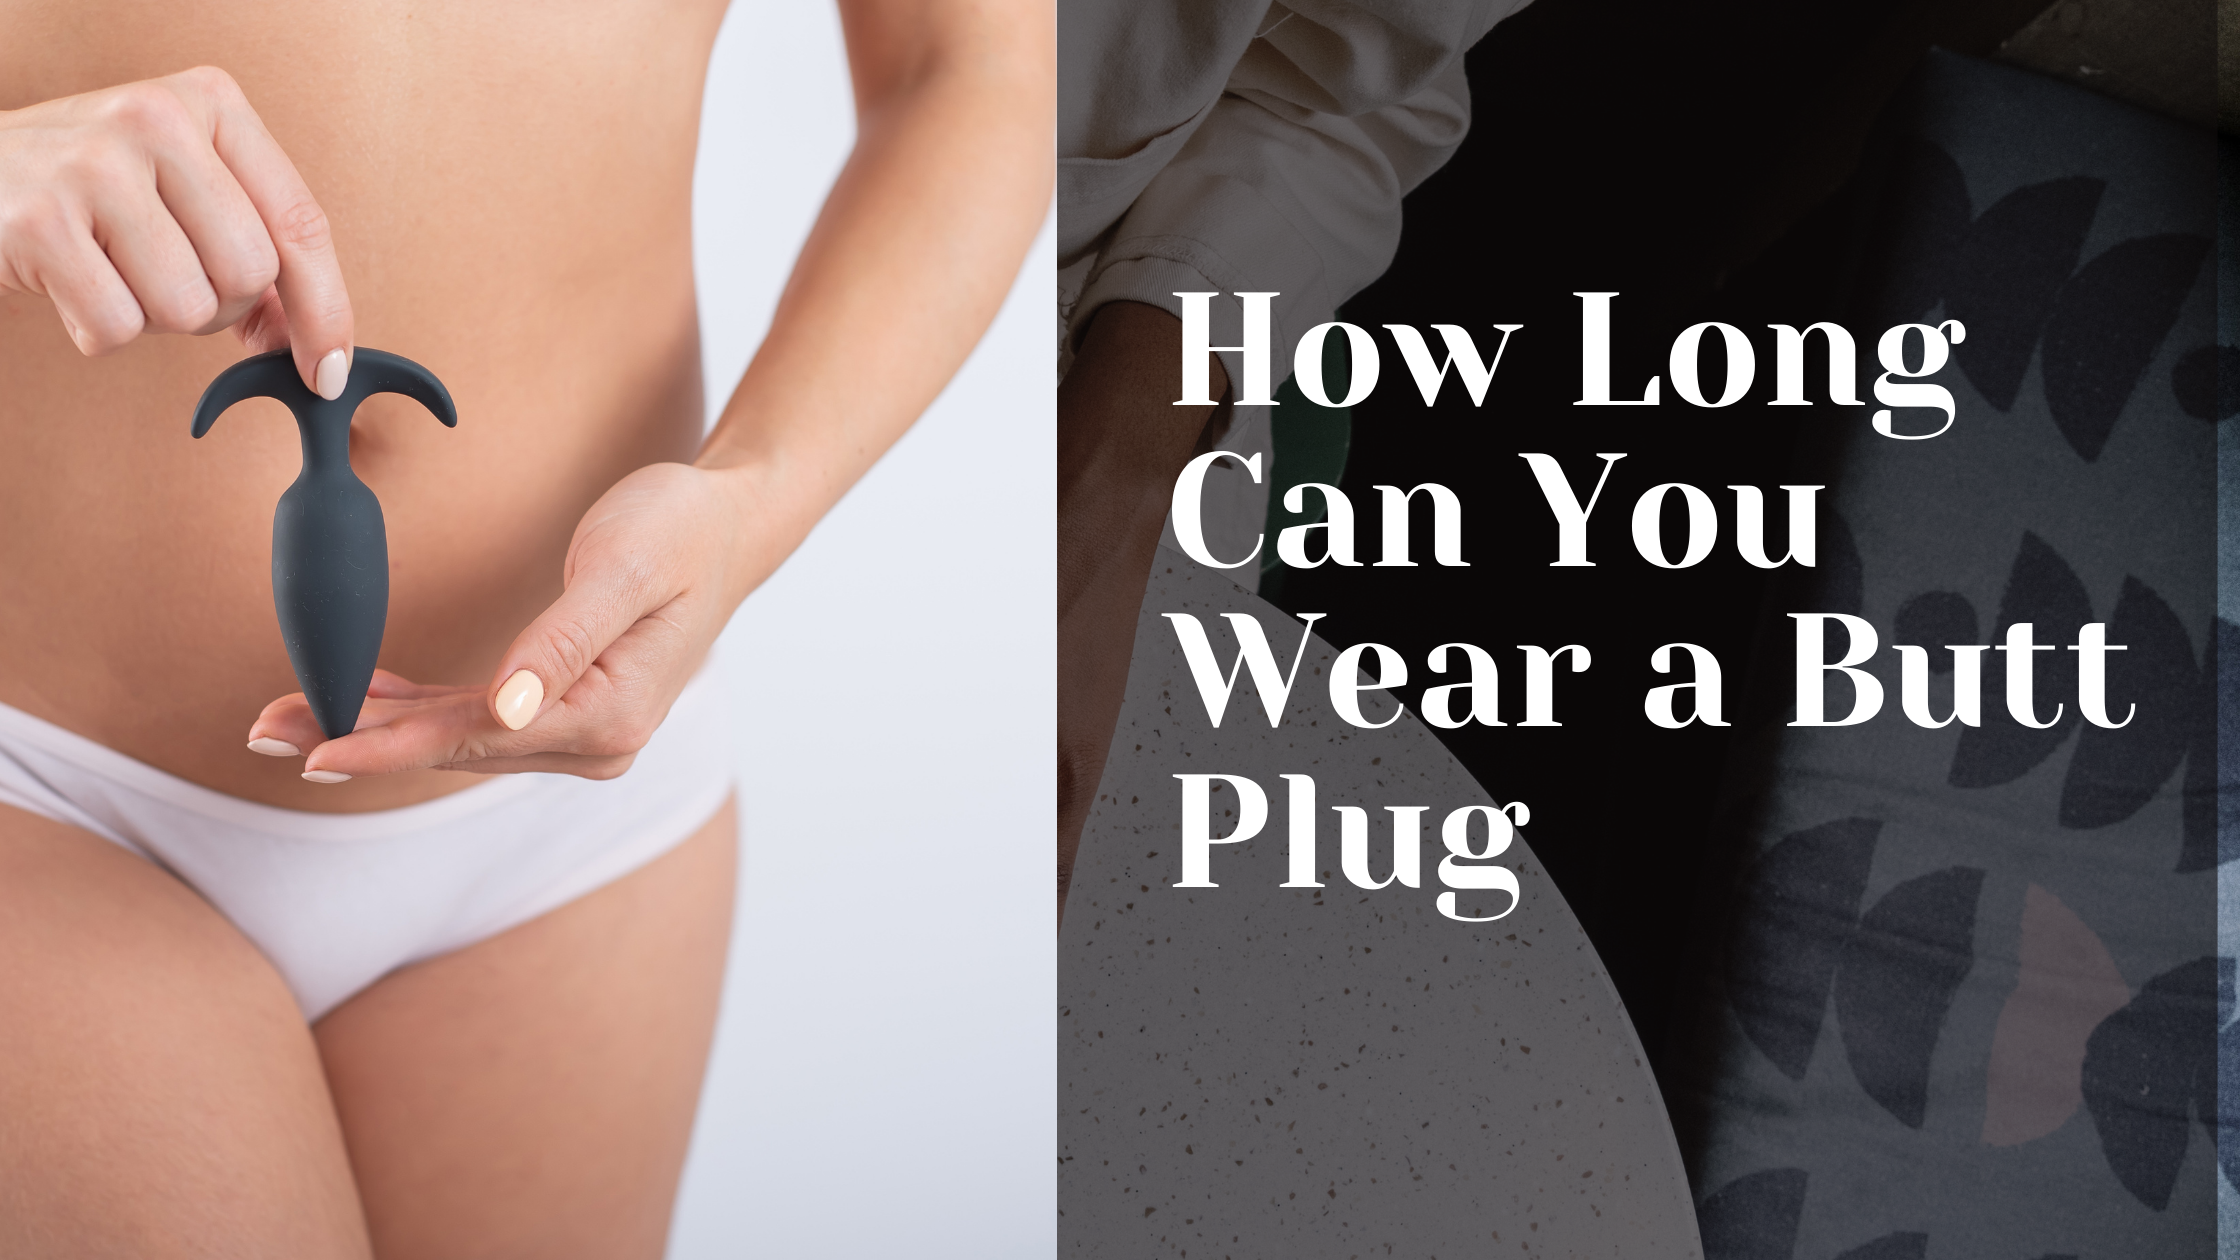 How Long Can You Wear a Butt Plug?